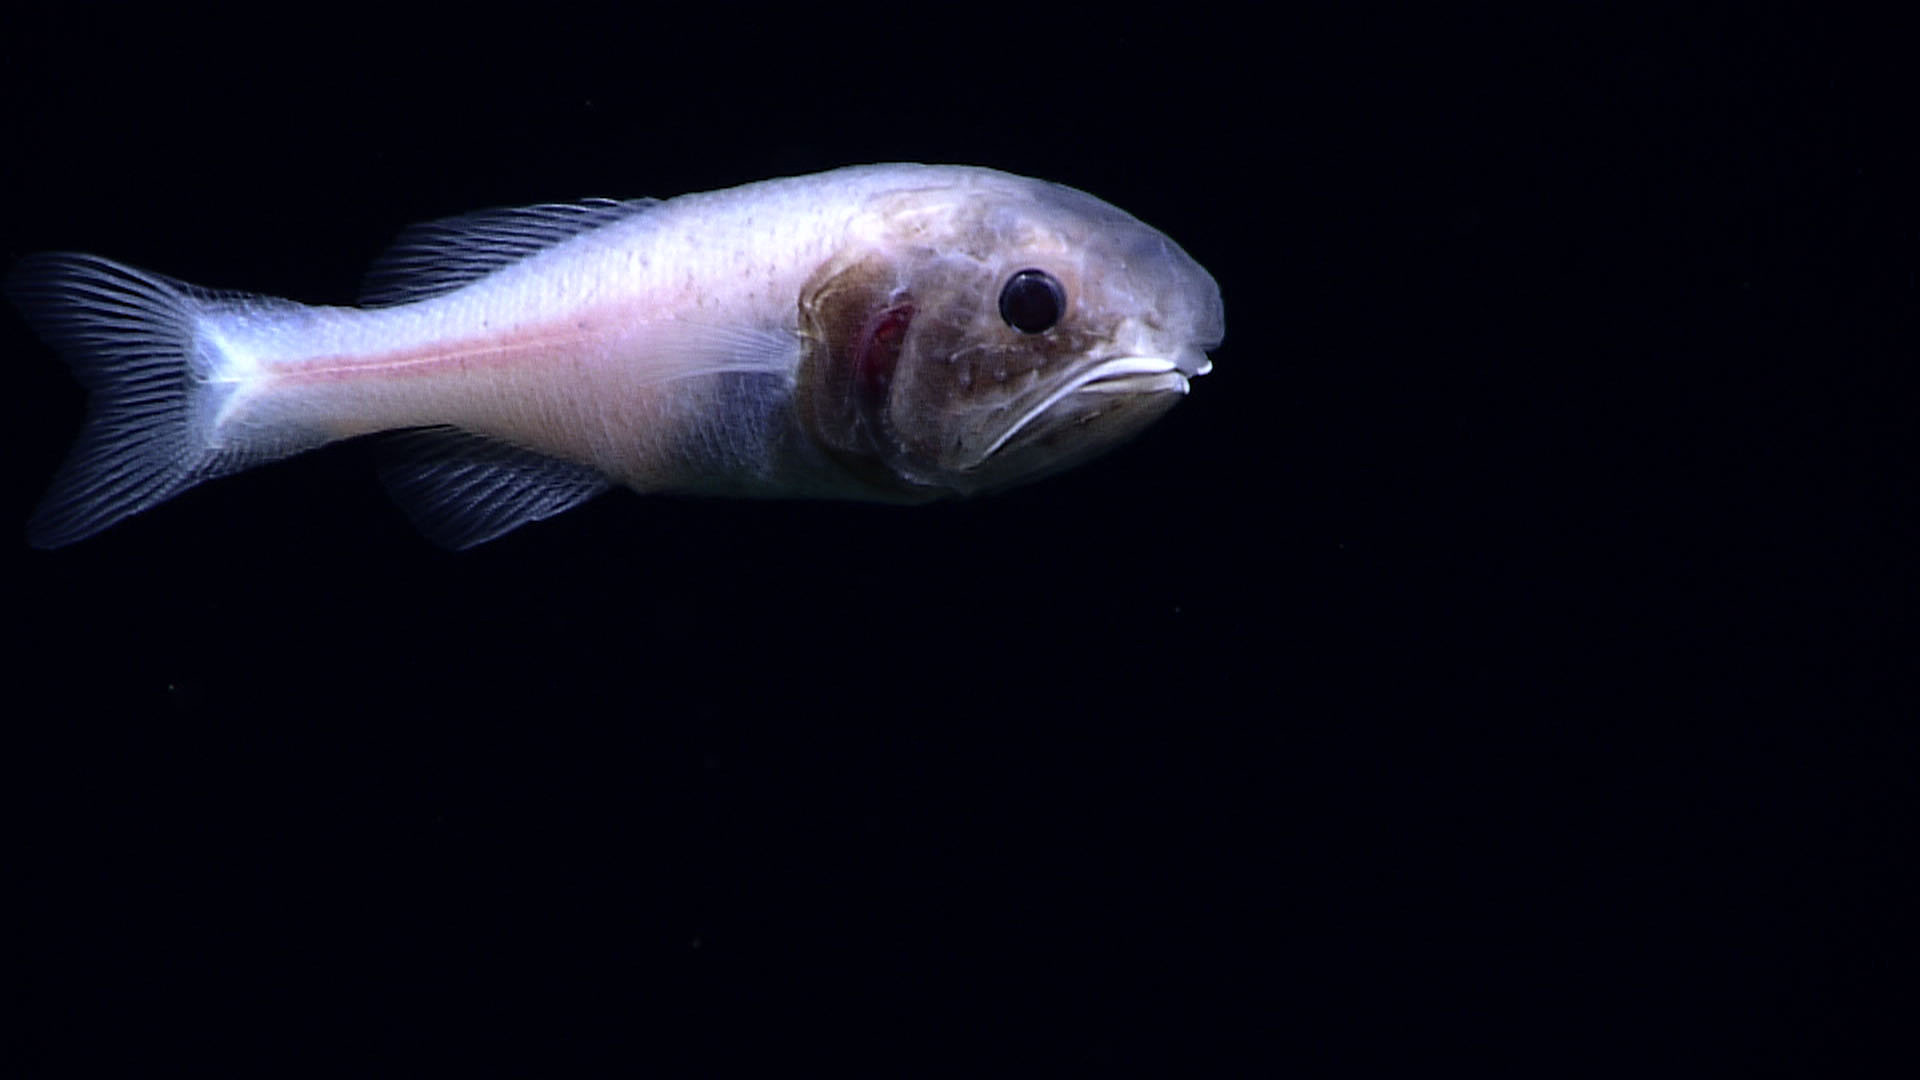 a deep-sea Malacosarcus sp., or prickelfish. Seen at a depth of nearly 5,900 meters (3.7 miles)